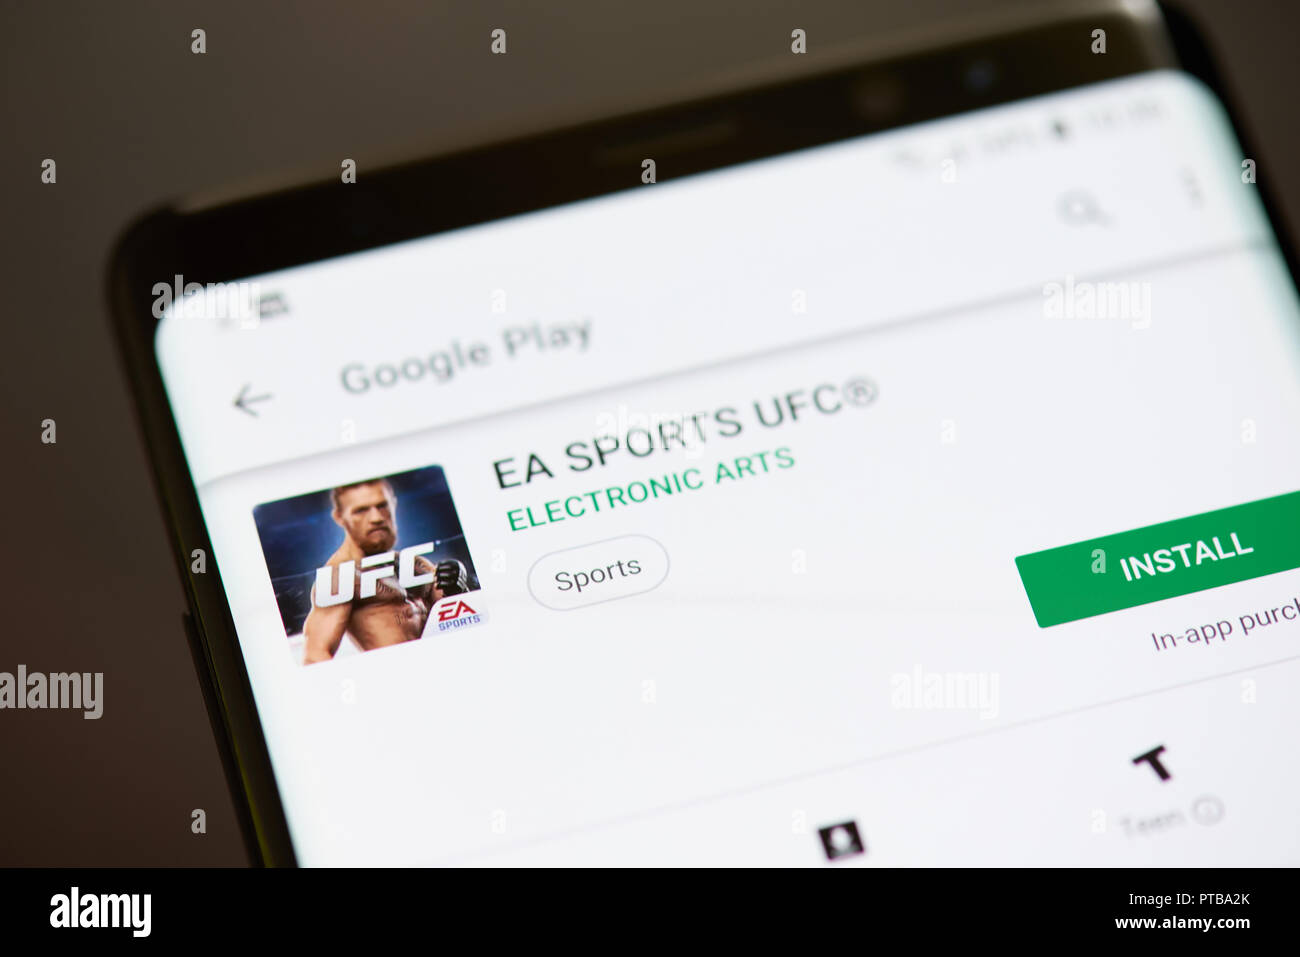 New york, USA - october 8, 2018: Ufc sport game app on smartphone screen close up view Stock Photo